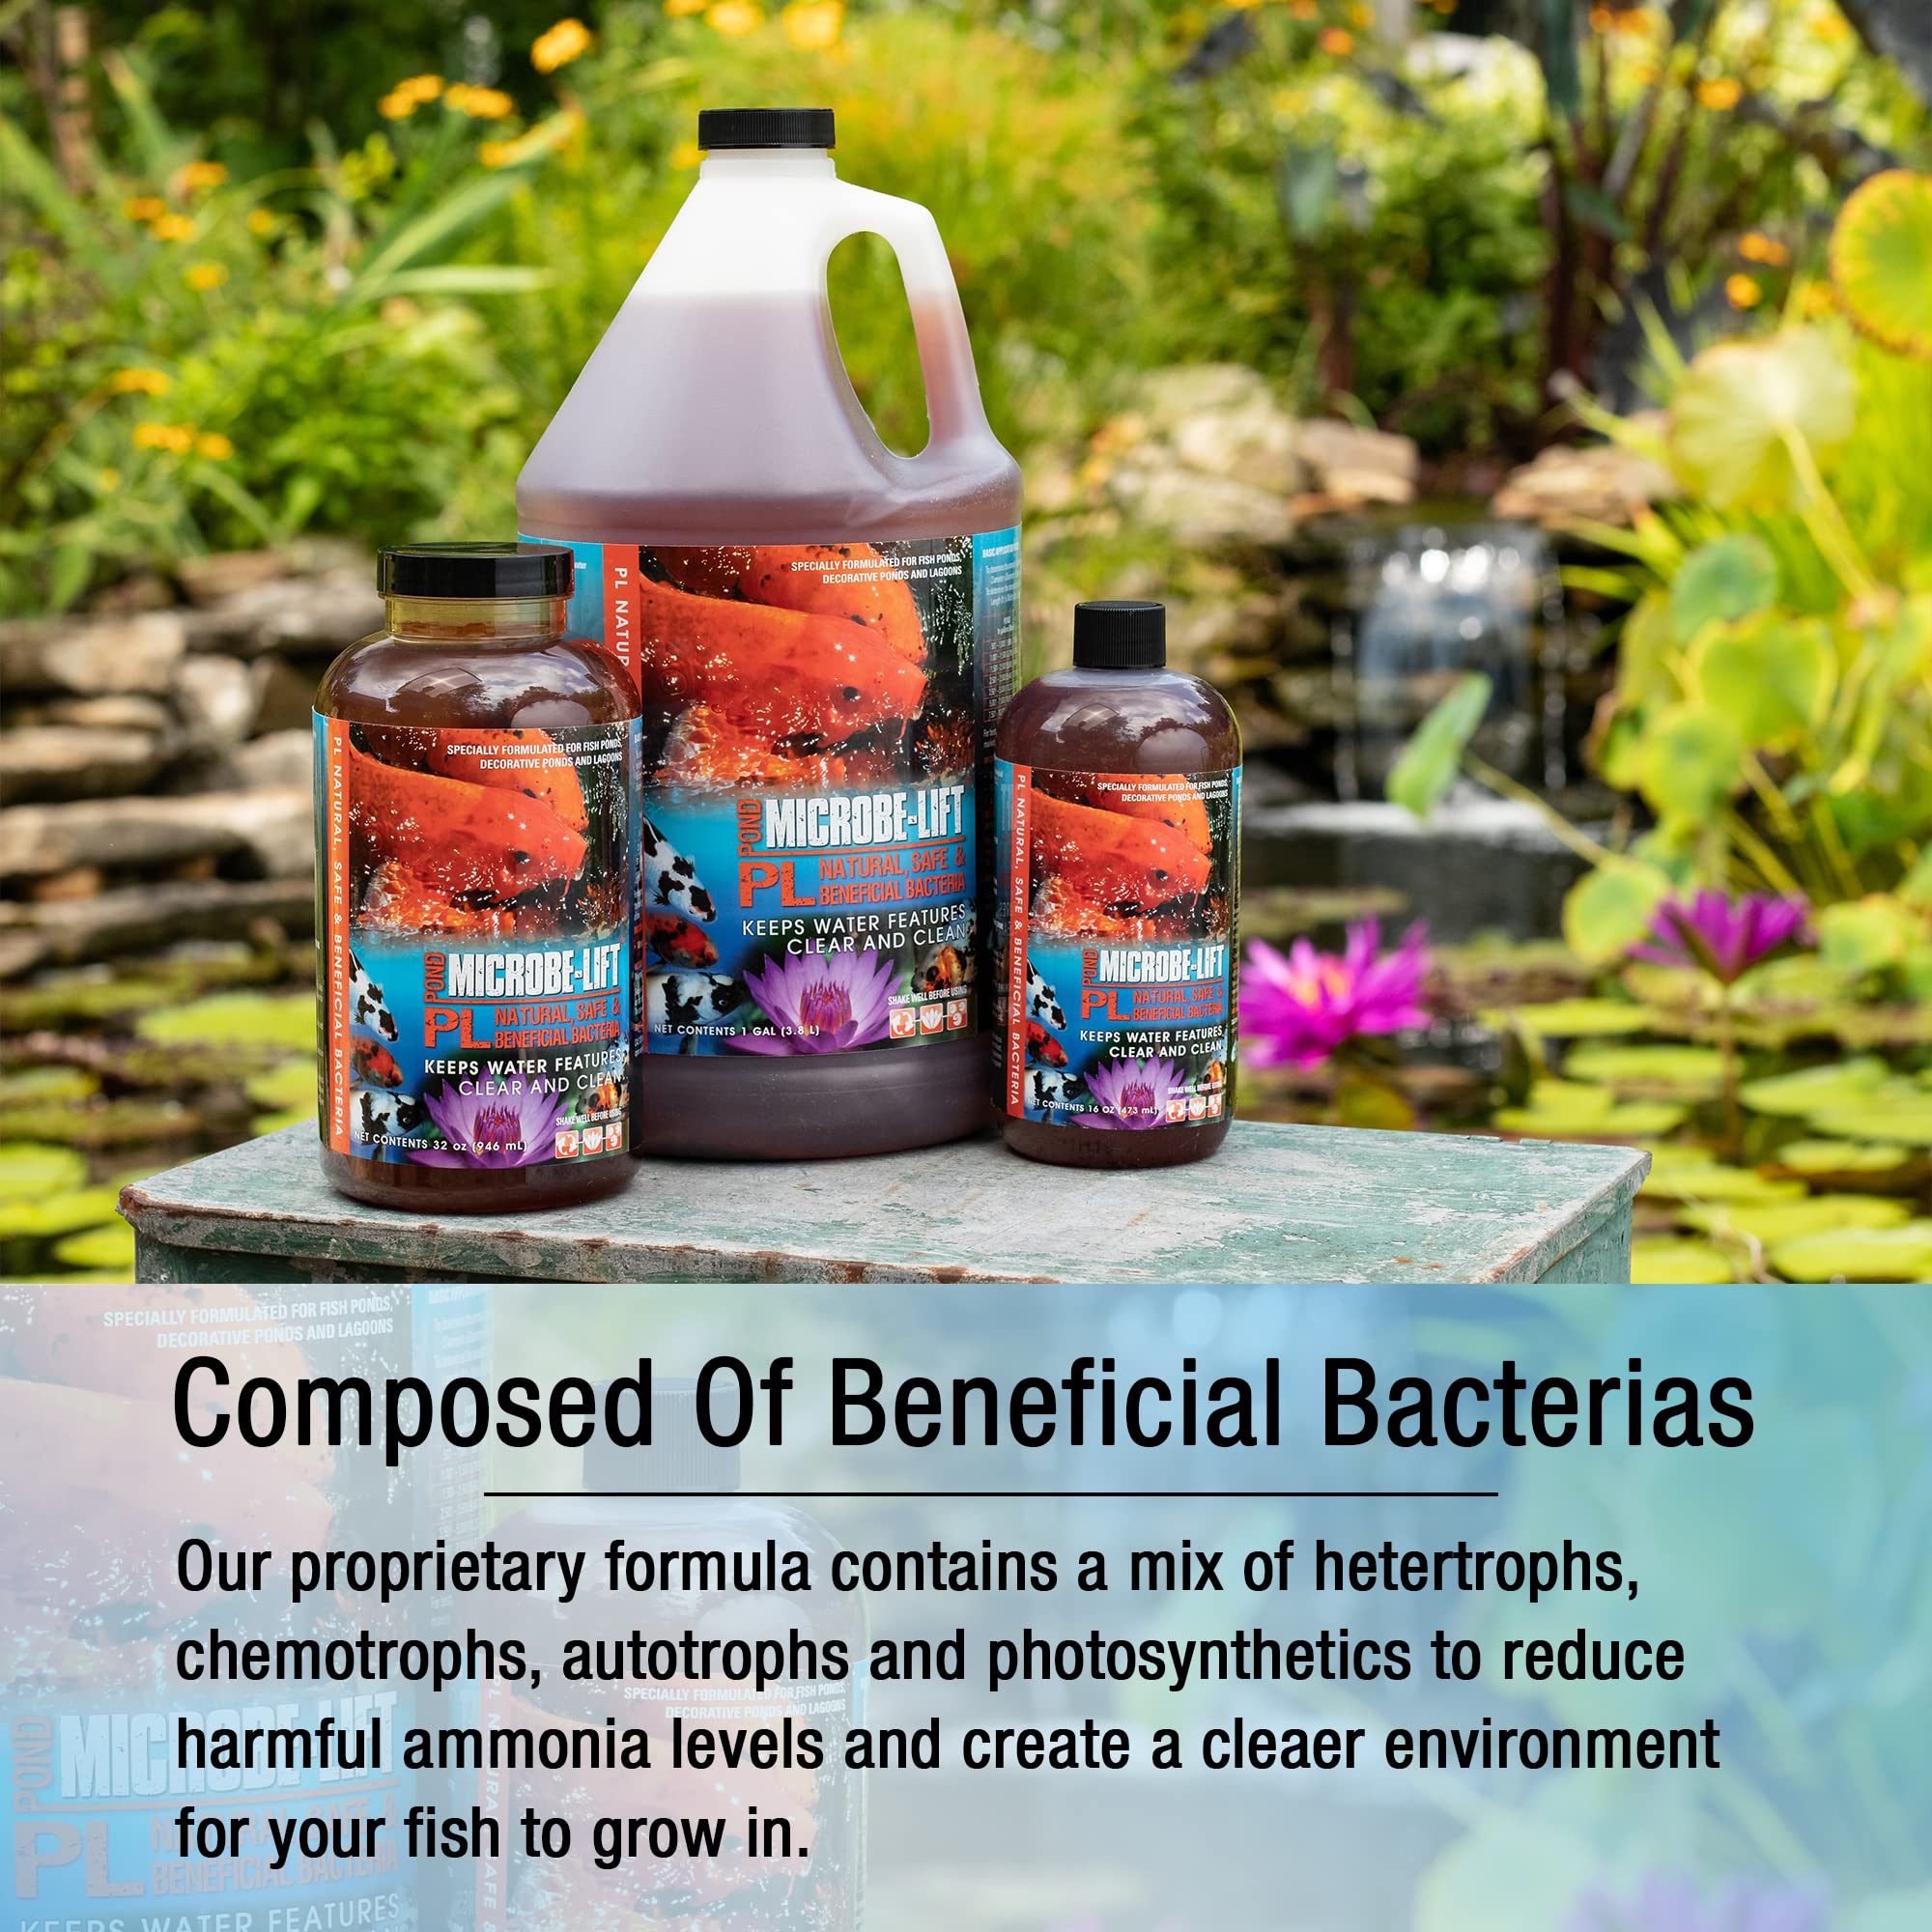 MICROBE-LIFT PL Pond Bacteria and Outdoor Water Garden Cleaner, Safe for Live Koi Fish, Plant Life, and Decor (32 Ounces)